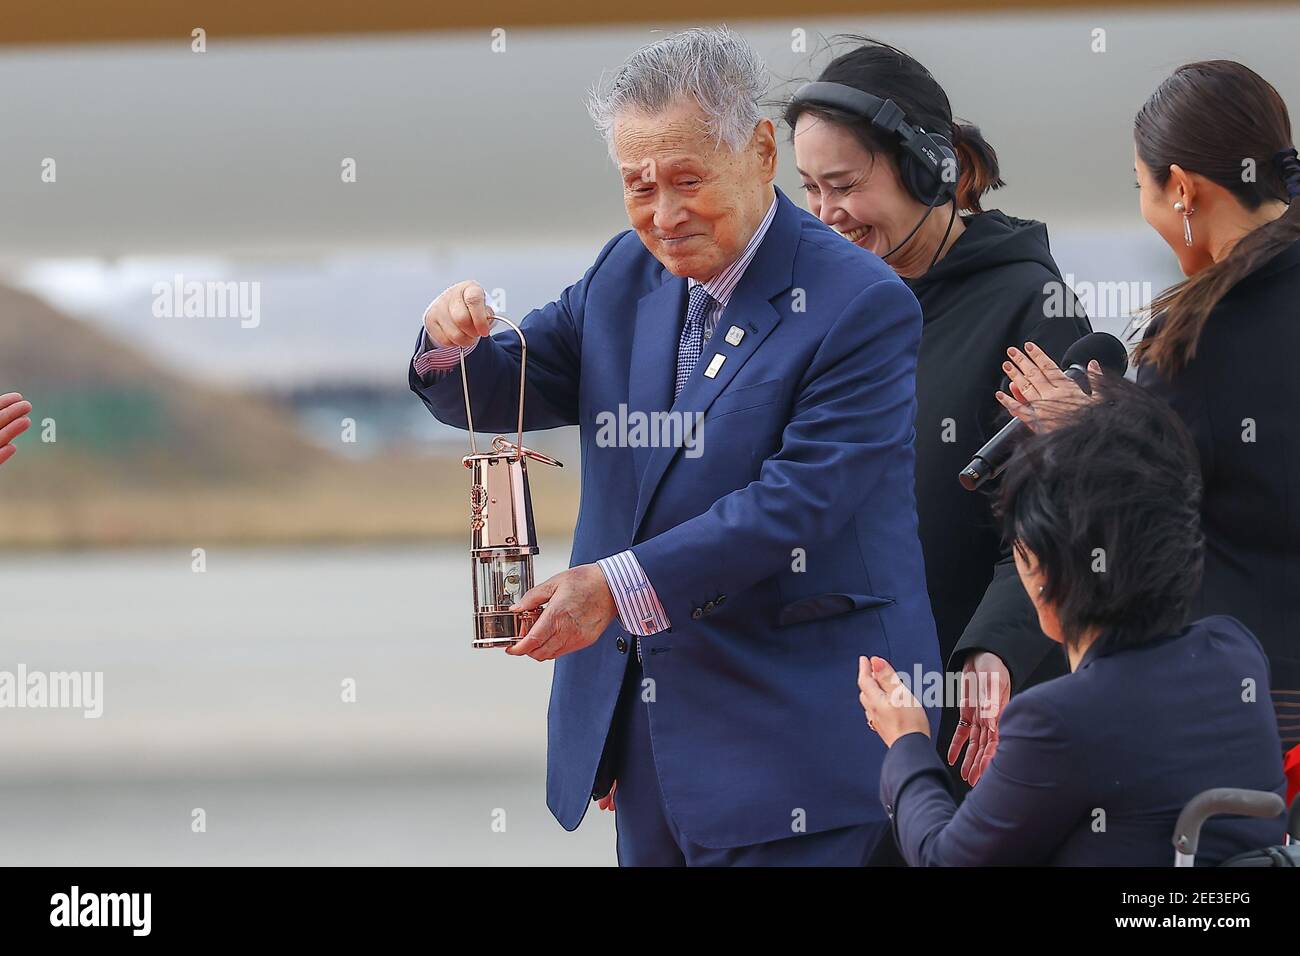 Miyagi, Japan. 20th Mar, 2020. Yoshiro Mori, chairman of the Tokyo Organizing Committee for the Olympic and Paralympic Games (Tokyo 2020), holds a torch seed at the Air Self-Defense Force's Matsushima Air Base in Miyagi, Japan. on March 20, 2020 in Miyagi, Japan. The games were originally set to begin July 24, 2020, but they have been delayed due to the Covid-19 pandemic. The games have been tentatively rescheduled for July 23, 2021. (Photo by Kazuki Oishi/Sipa USA)**Japan Out** Credit: Sipa USA/Alamy Live News Stock Photo